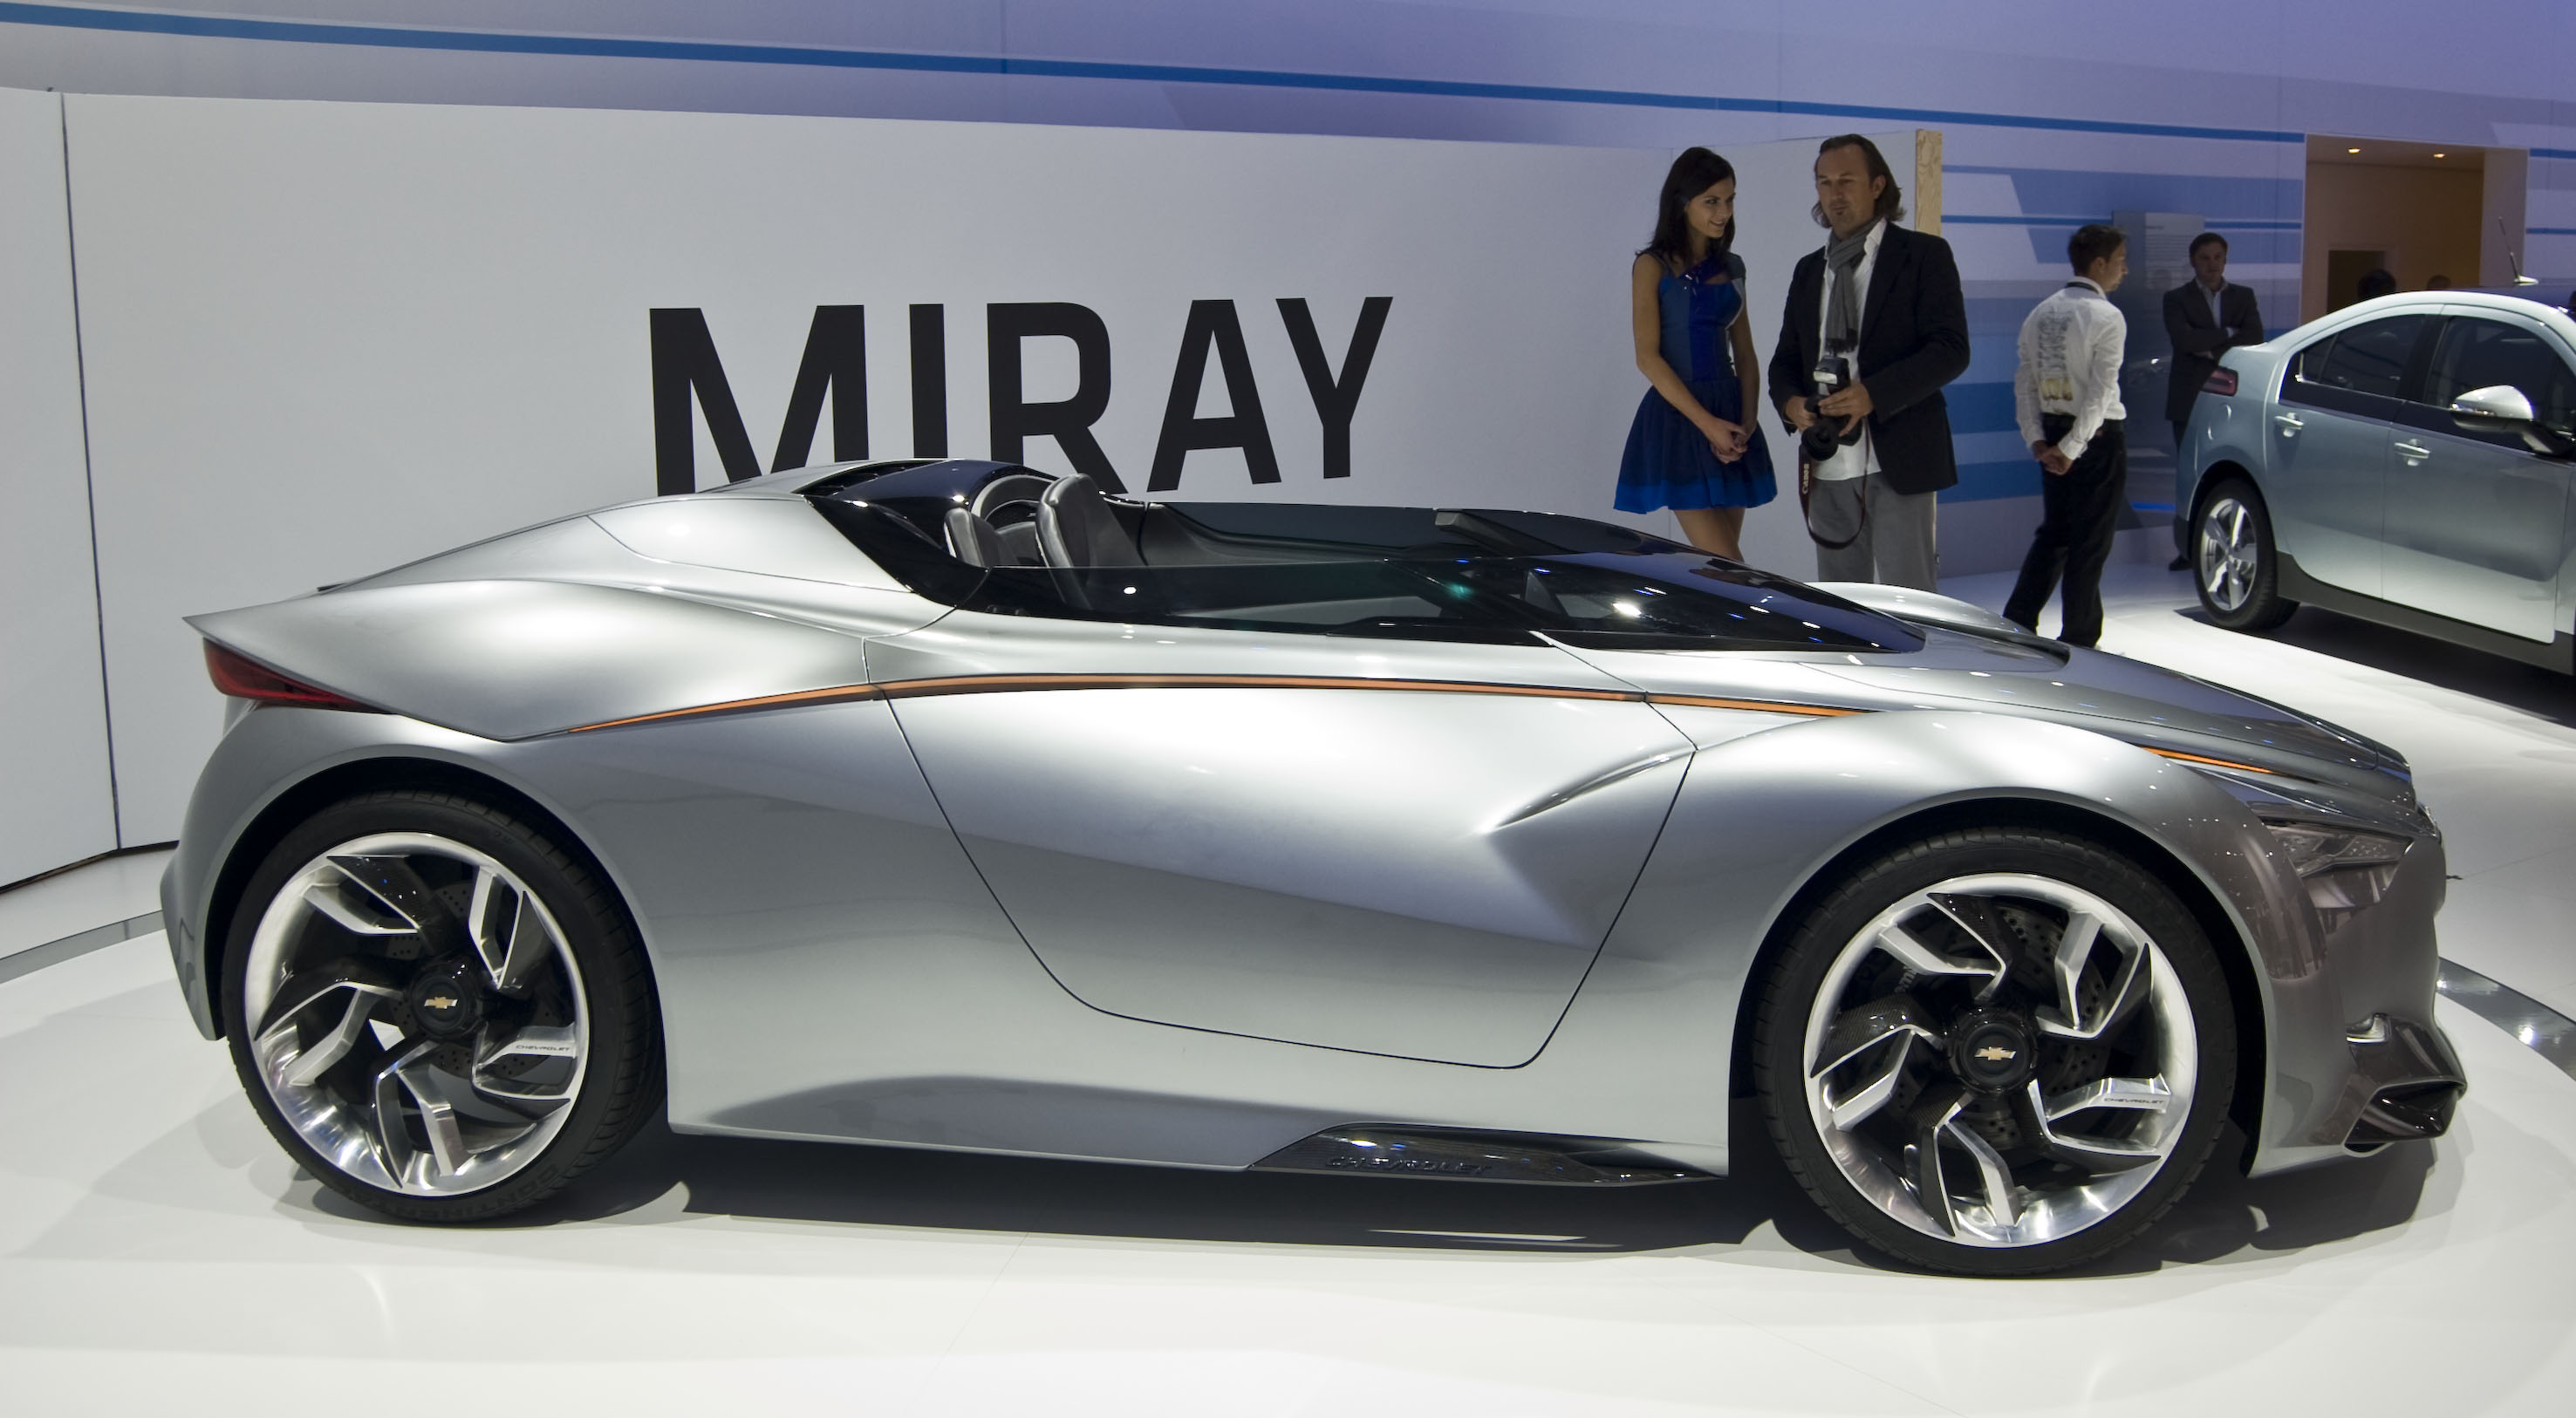 HQ Chevrolet Miray Wallpapers | File 416.43Kb